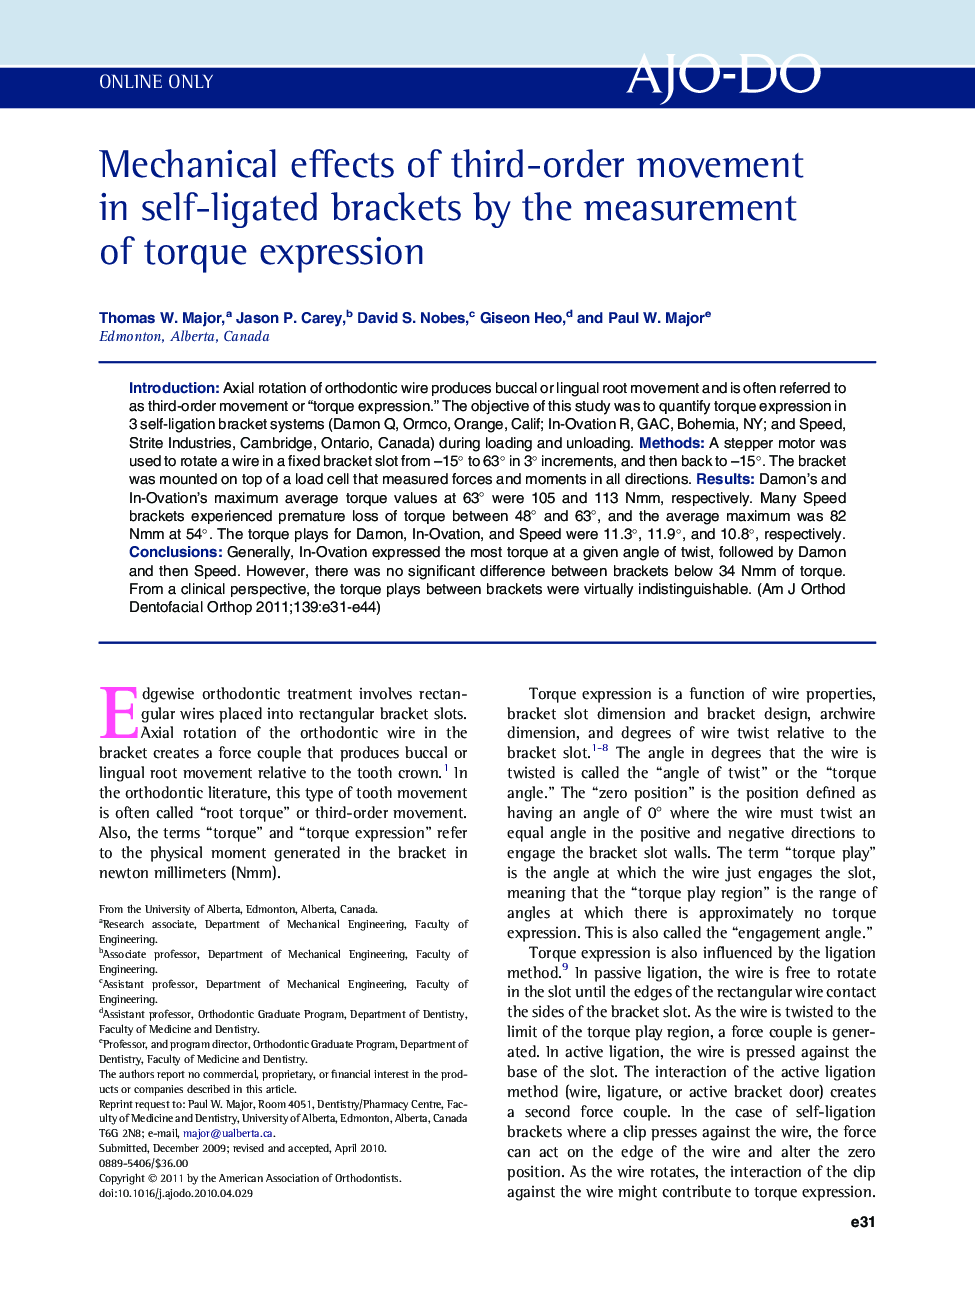 Mechanical effects of third-order movement in self-ligated brackets by the measurement of torque expression 